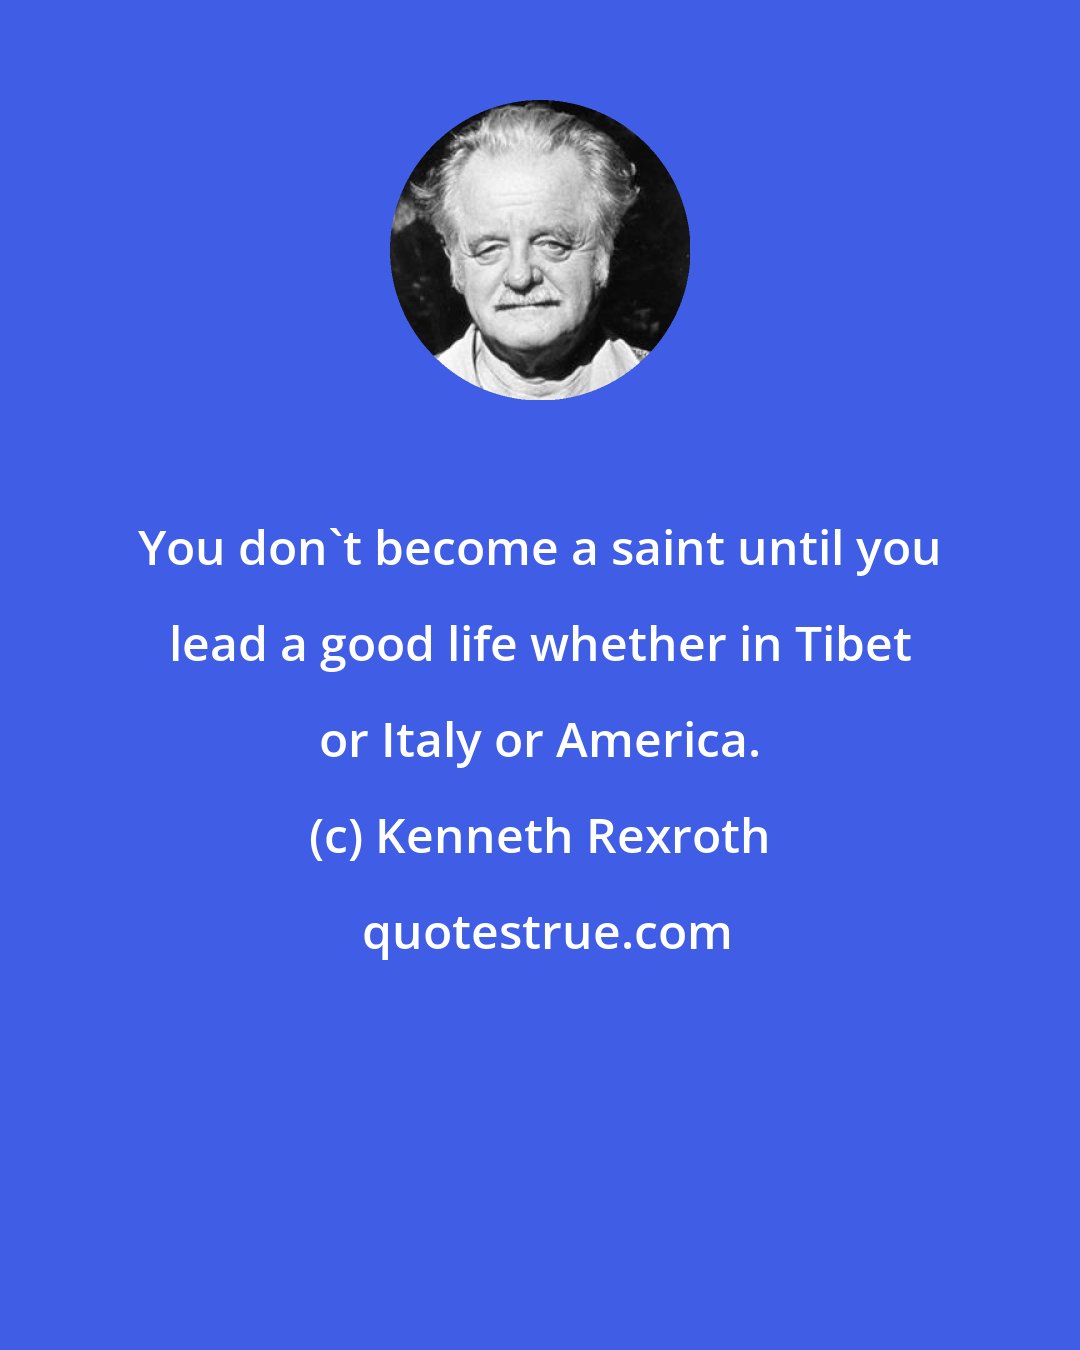 Kenneth Rexroth: You don't become a saint until you lead a good life whether in Tibet or Italy or America.